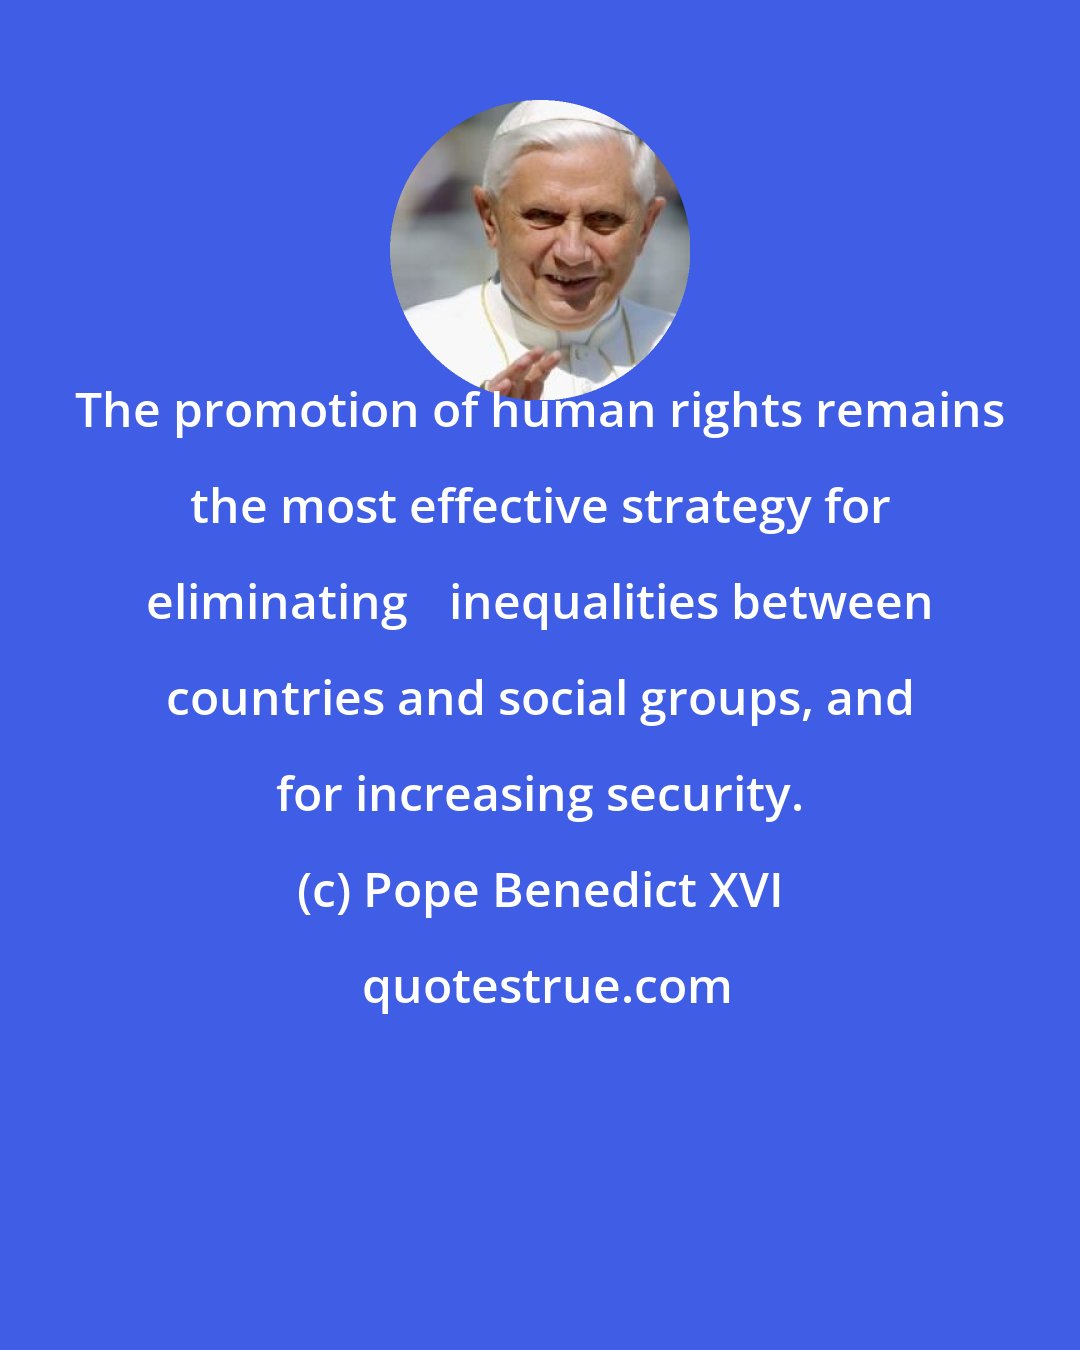 Pope Benedict XVI: The promotion of human rights remains the most effective strategy for eliminating 	inequalities between countries and social groups, and for increasing security.